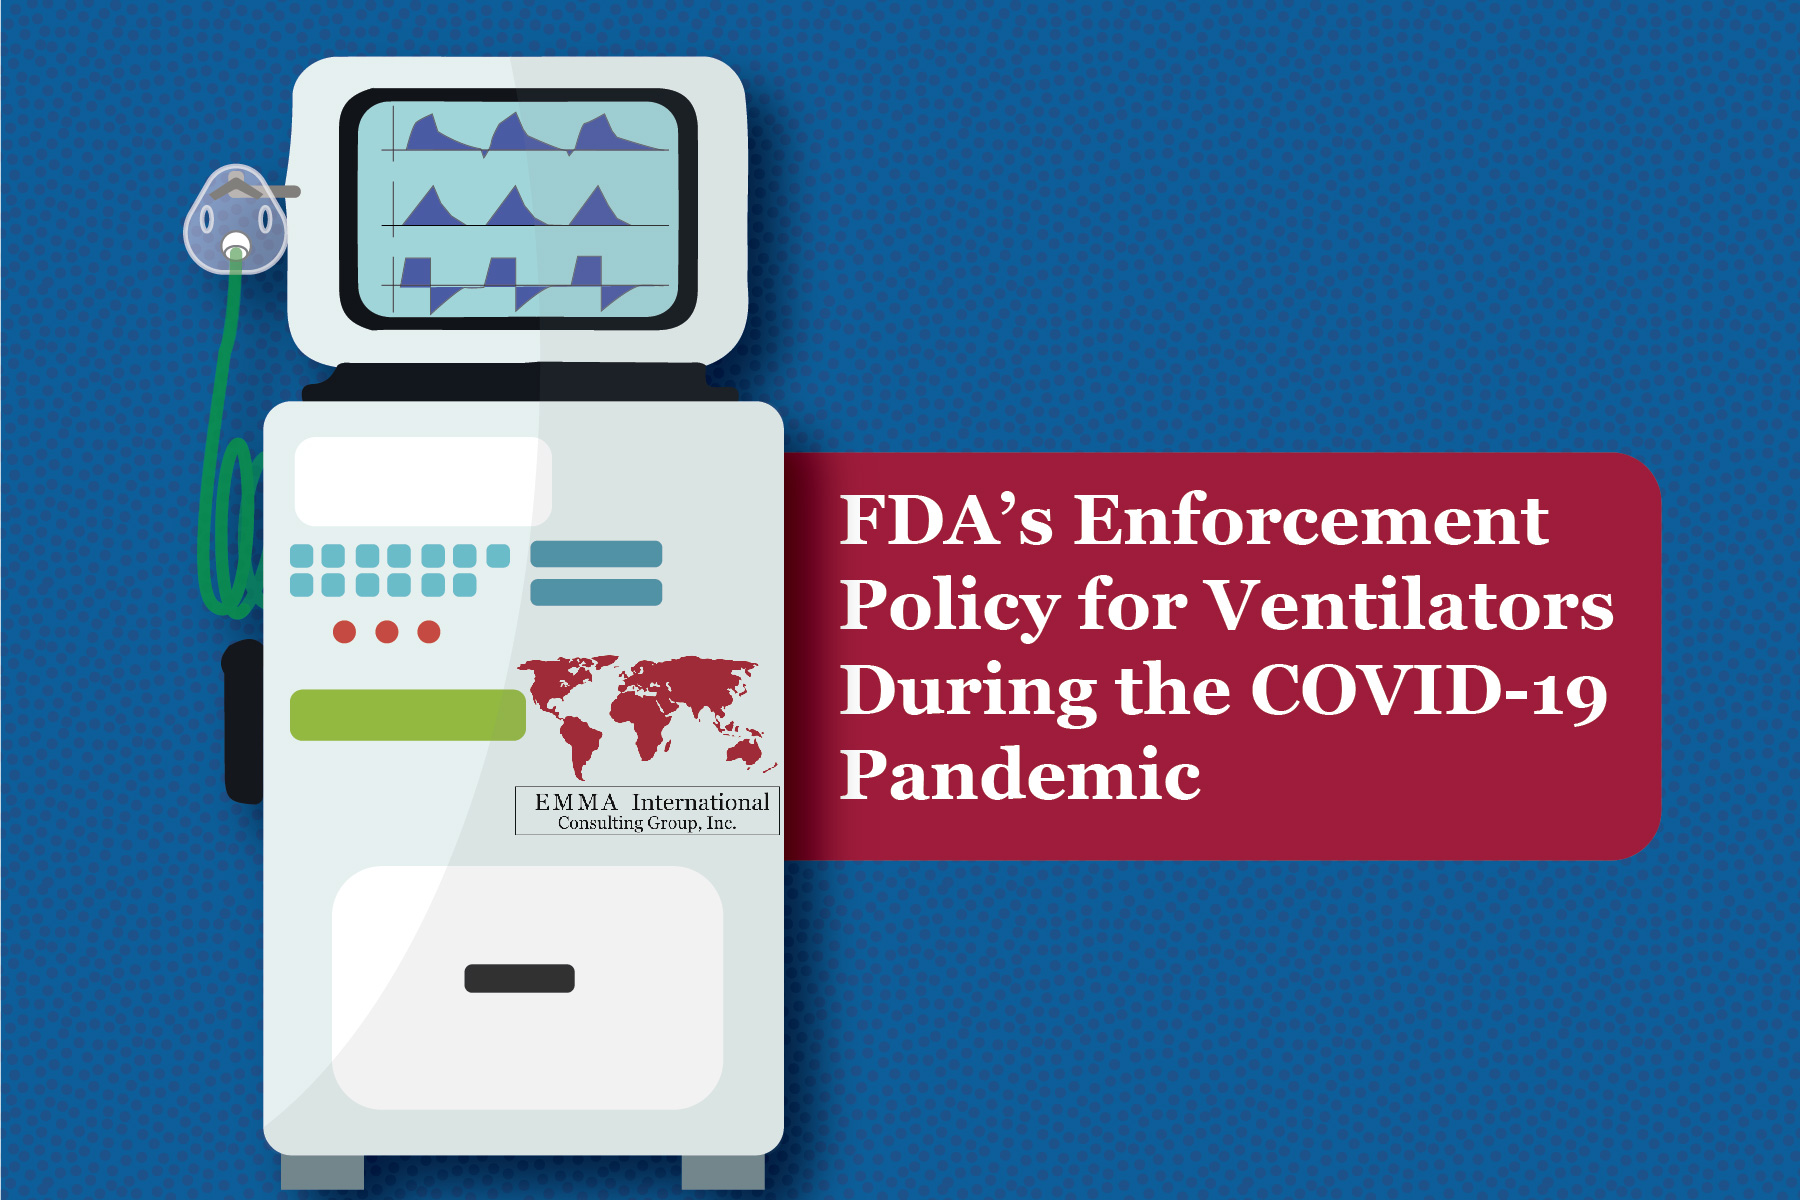 FDA’s Enforcement Policy for Ventilators During the COVID-19 Pandemic